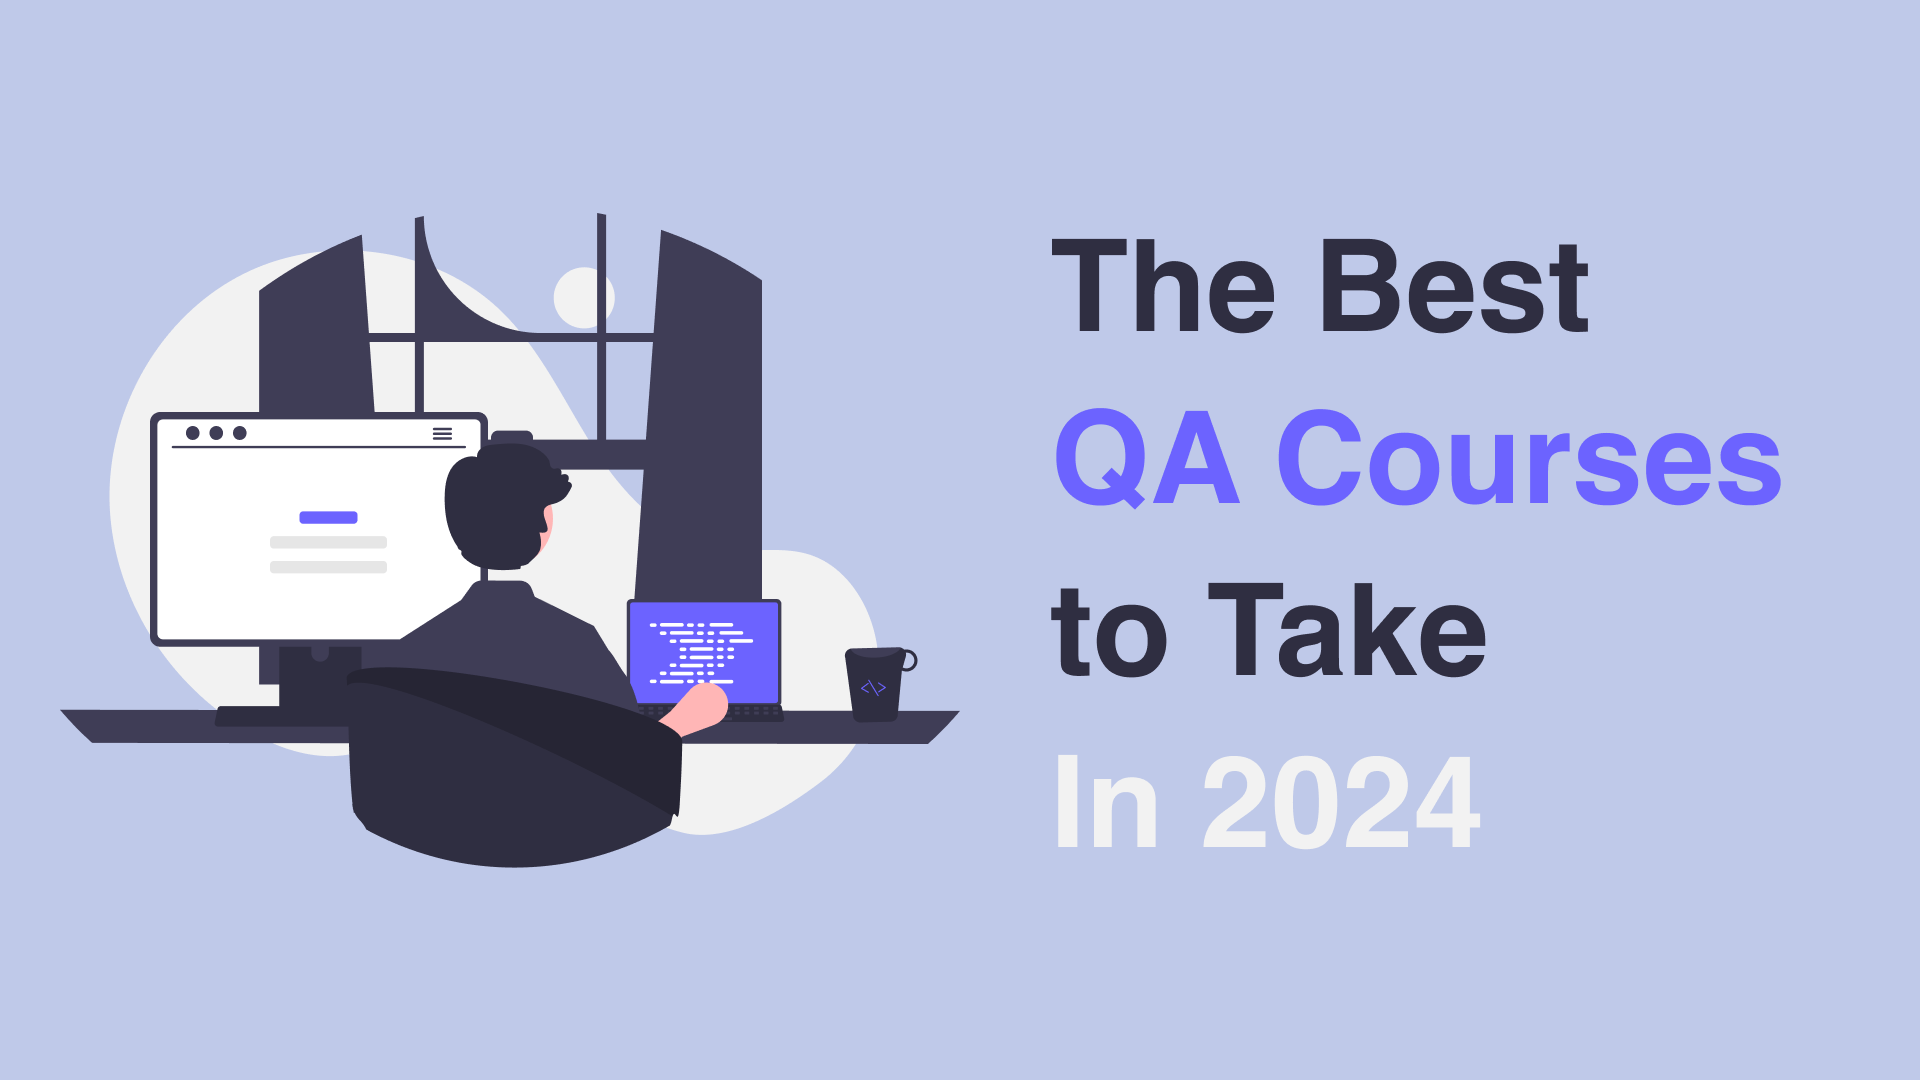 The Best QA Courses to Take In 2024